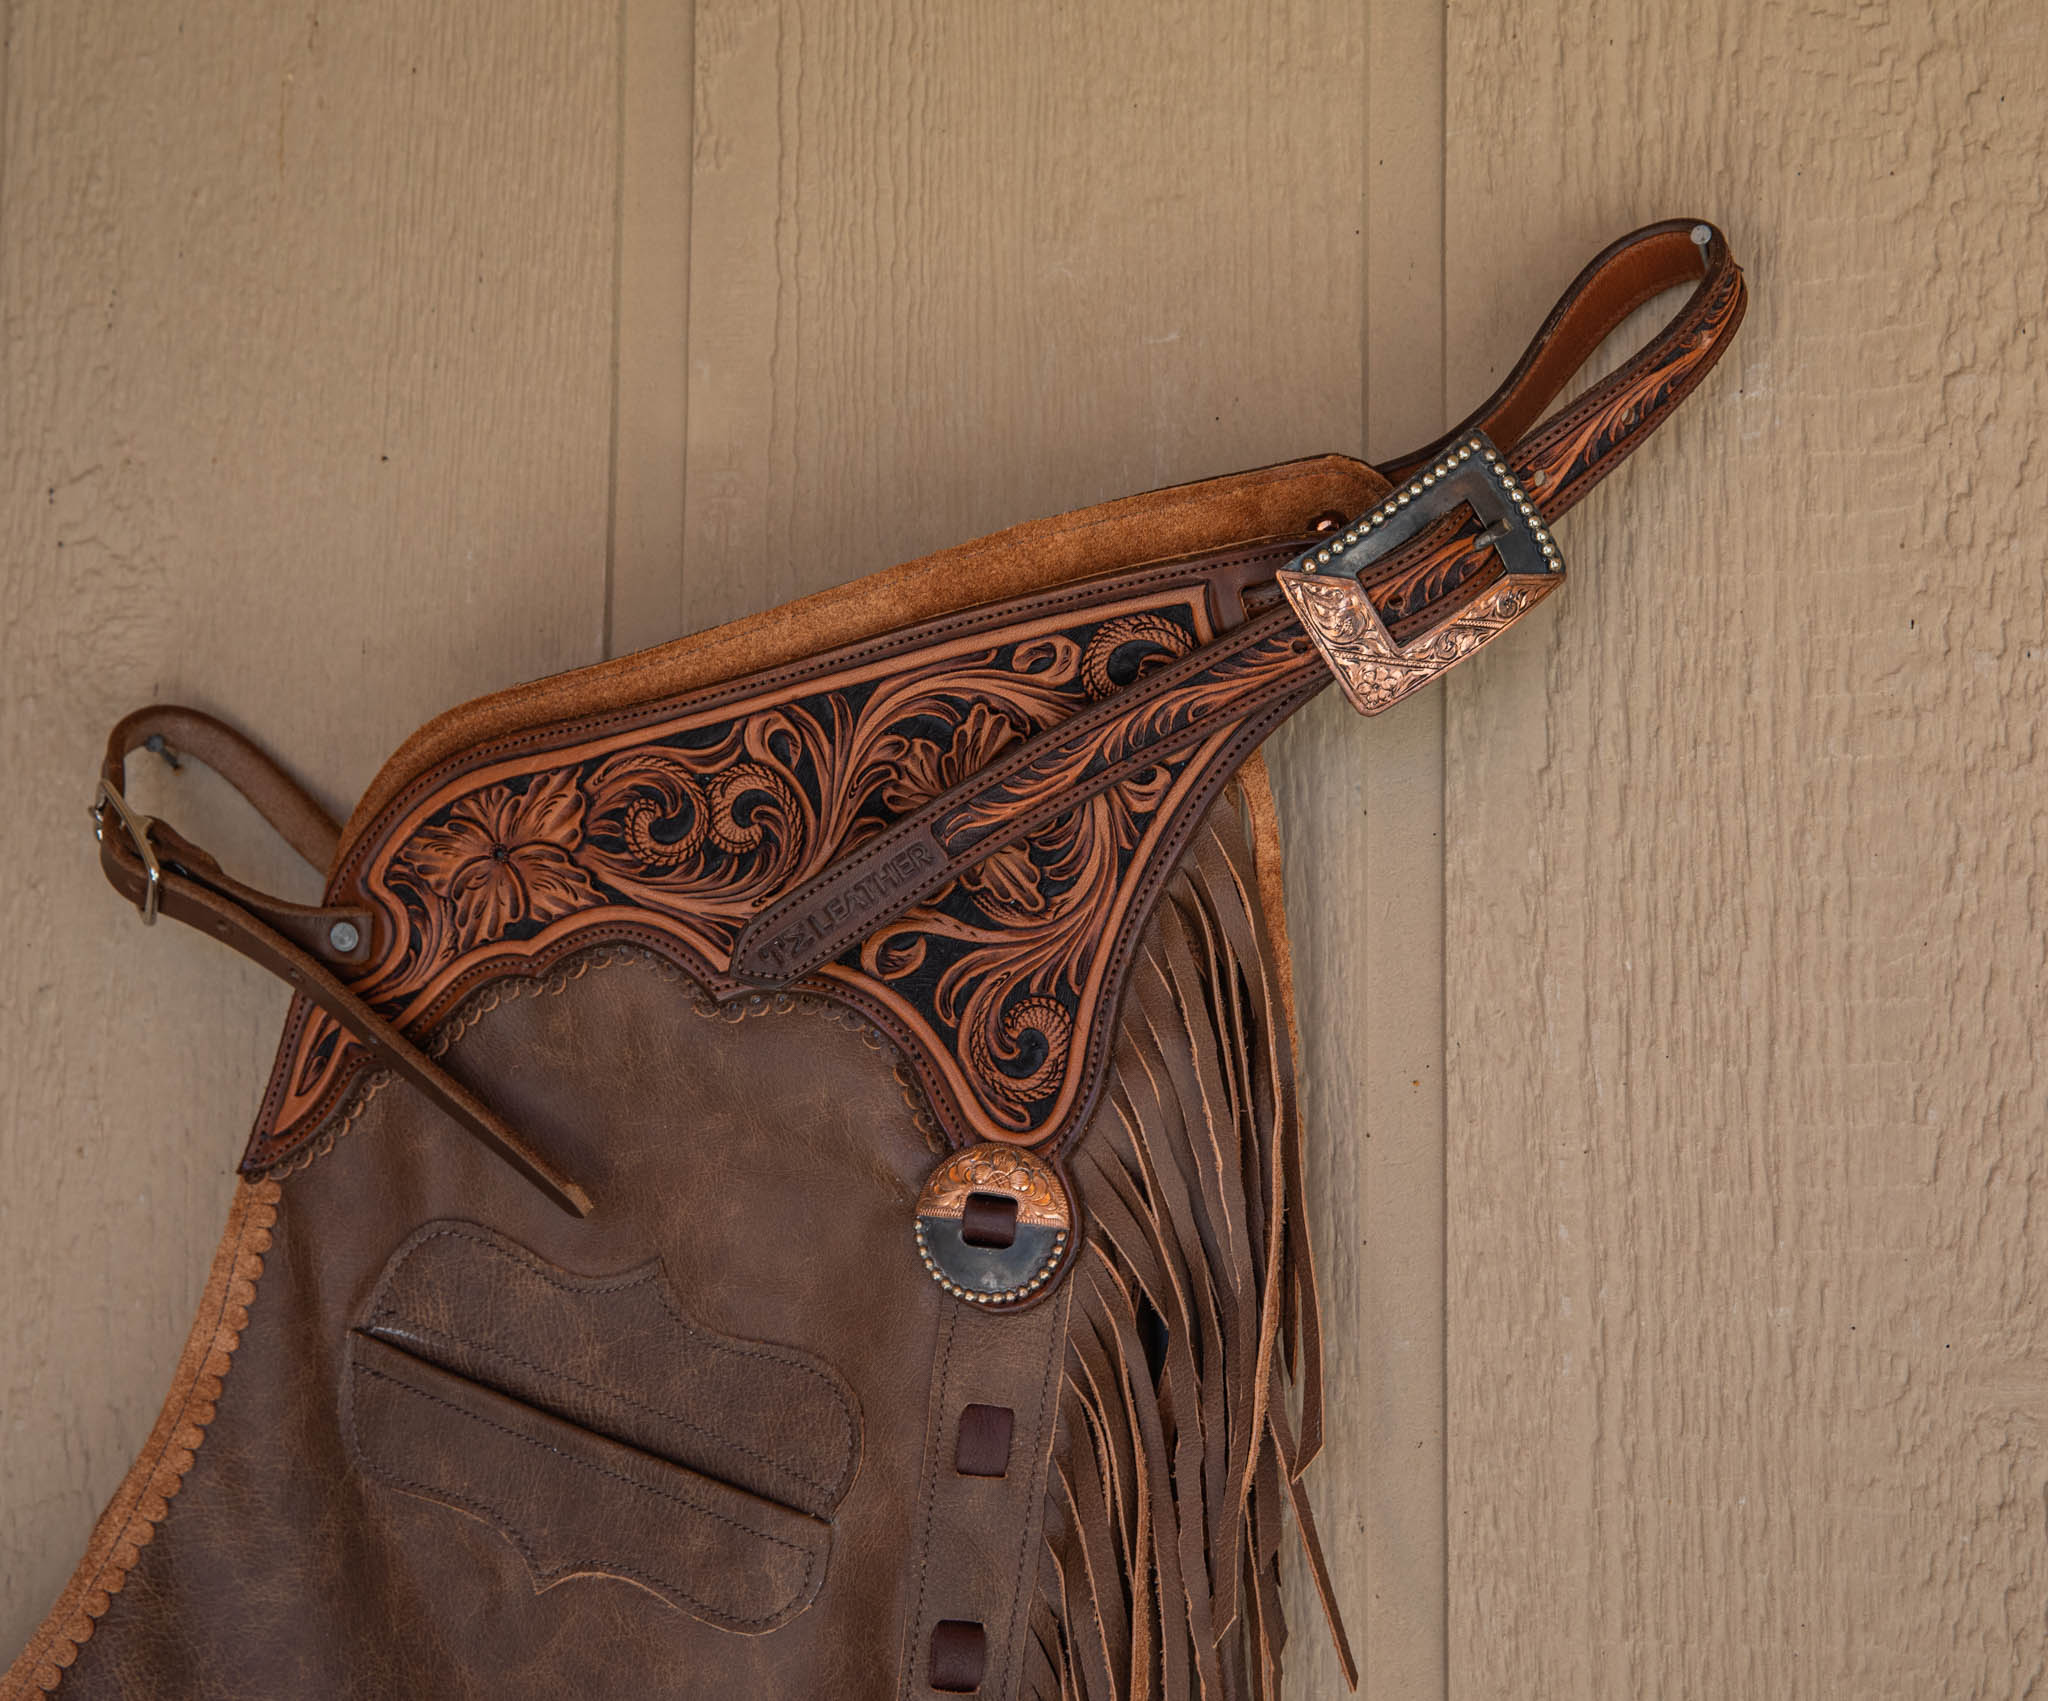 Rum Smooth-out Chaps w/ Black, Walnut & Light Brown Floral Yokes and Pocket